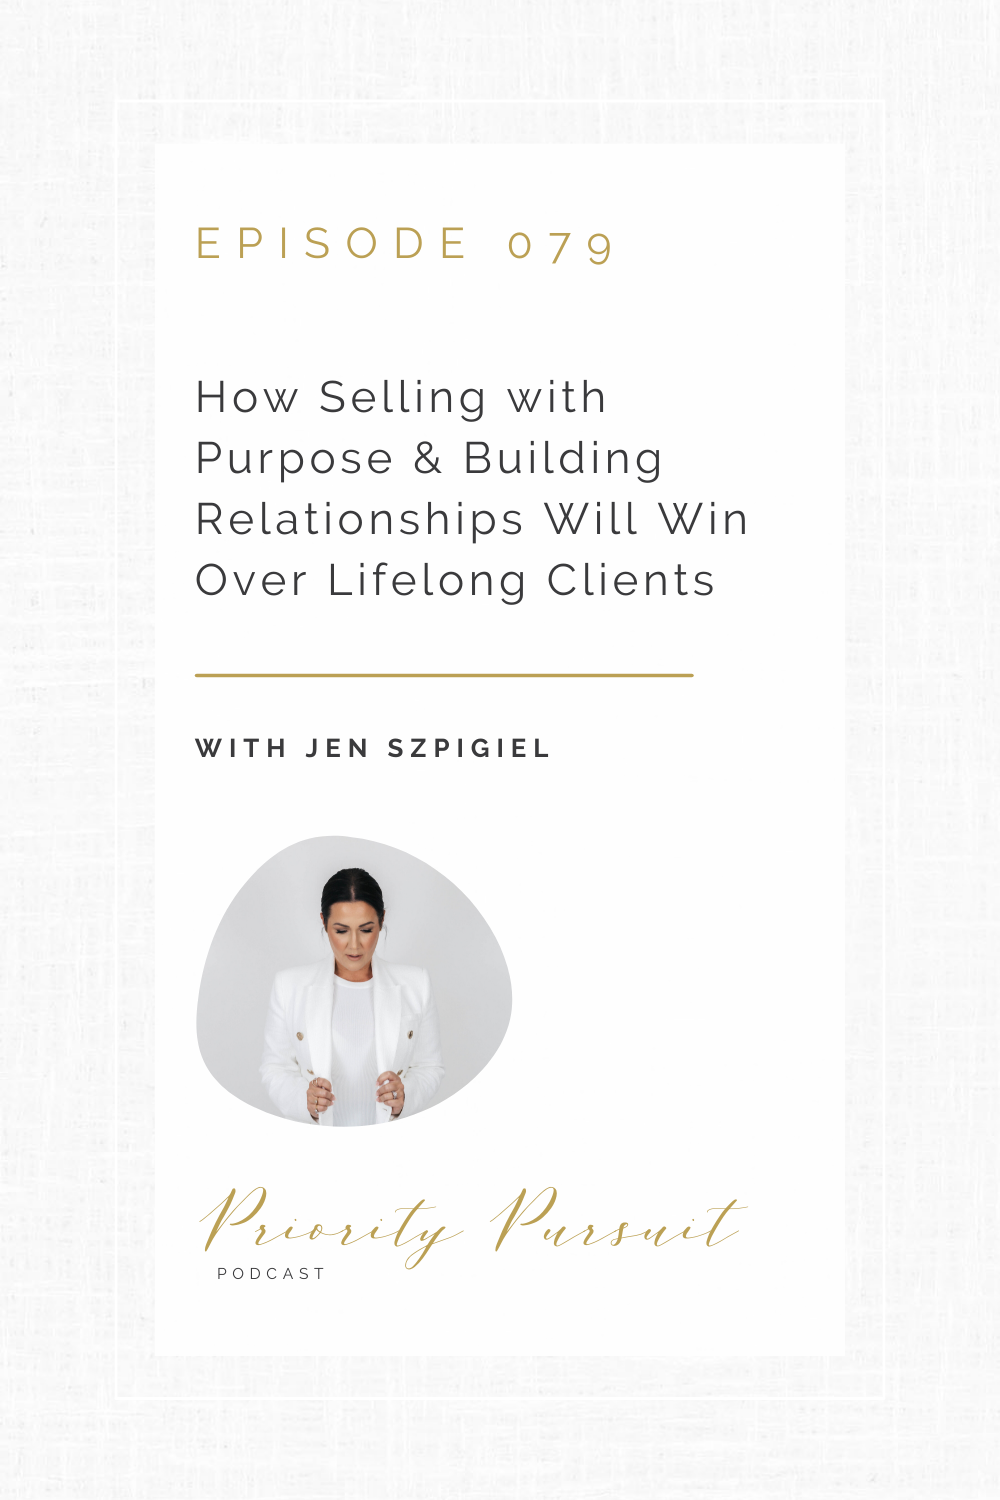 Victoria Rayburn and Jen Szpigiel discuss how selling with purpose and building relationships can help creatives enjoy lifelong relationships with clients.